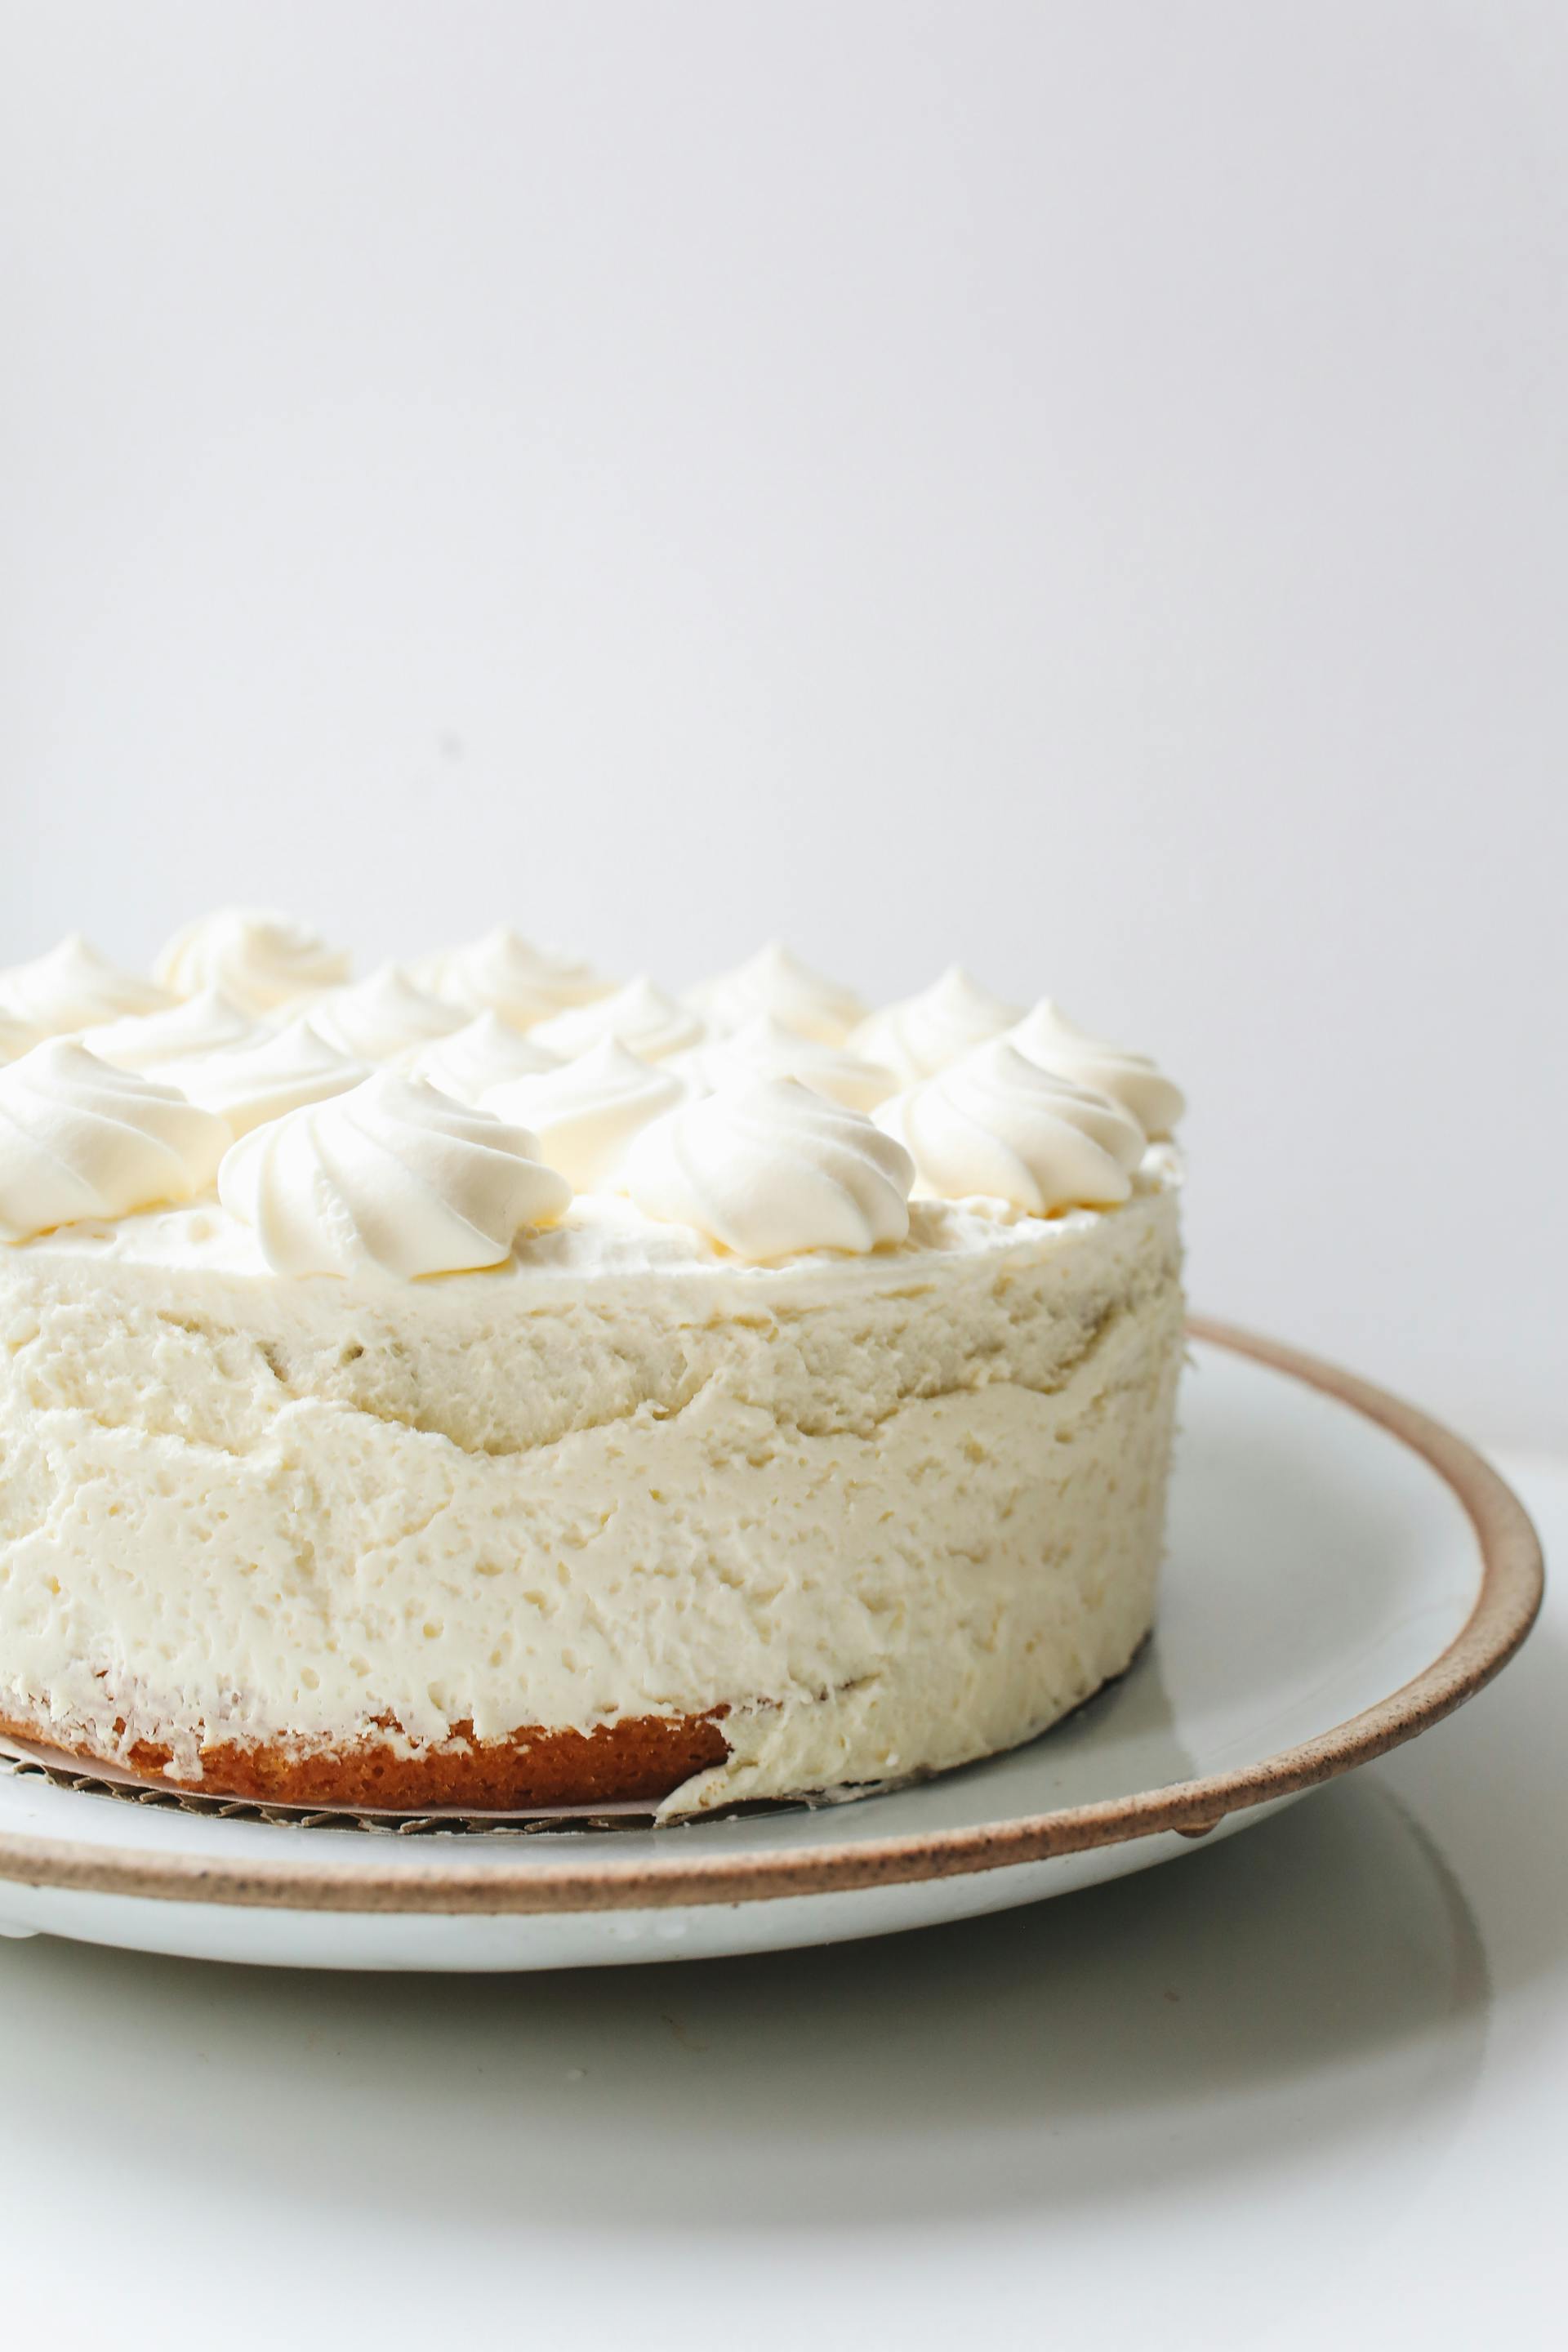 A white iced cake | Source: Pexels